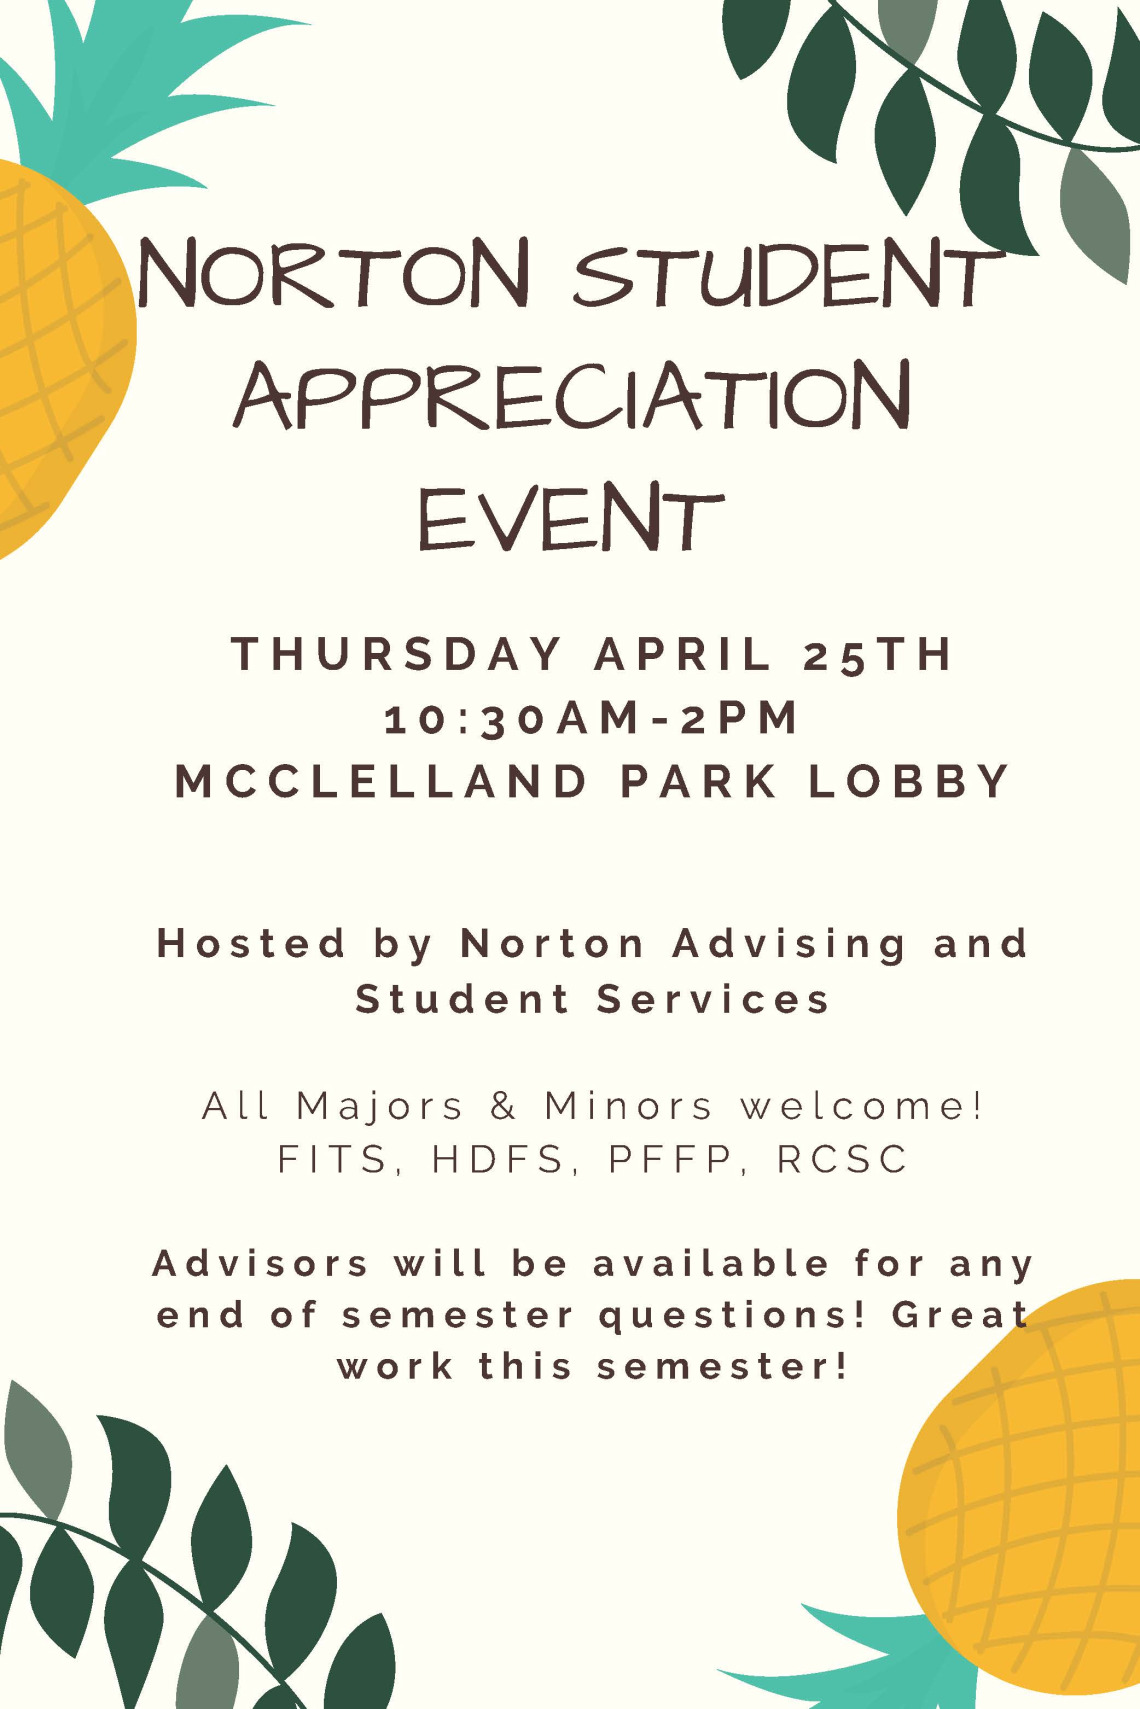 NORTON STUDENT APPRECIATION EVENT THURSDAY APRIL 25TH 10:30AM-2PM MCCLELLAND PARK LOBBY Hosted by Norton Advising and Student Services All Majors & Minors welcome! FITS, HDFS, PFFP, RCSC Advisors will be available for anyend of semester questions! Greatwork this semester!